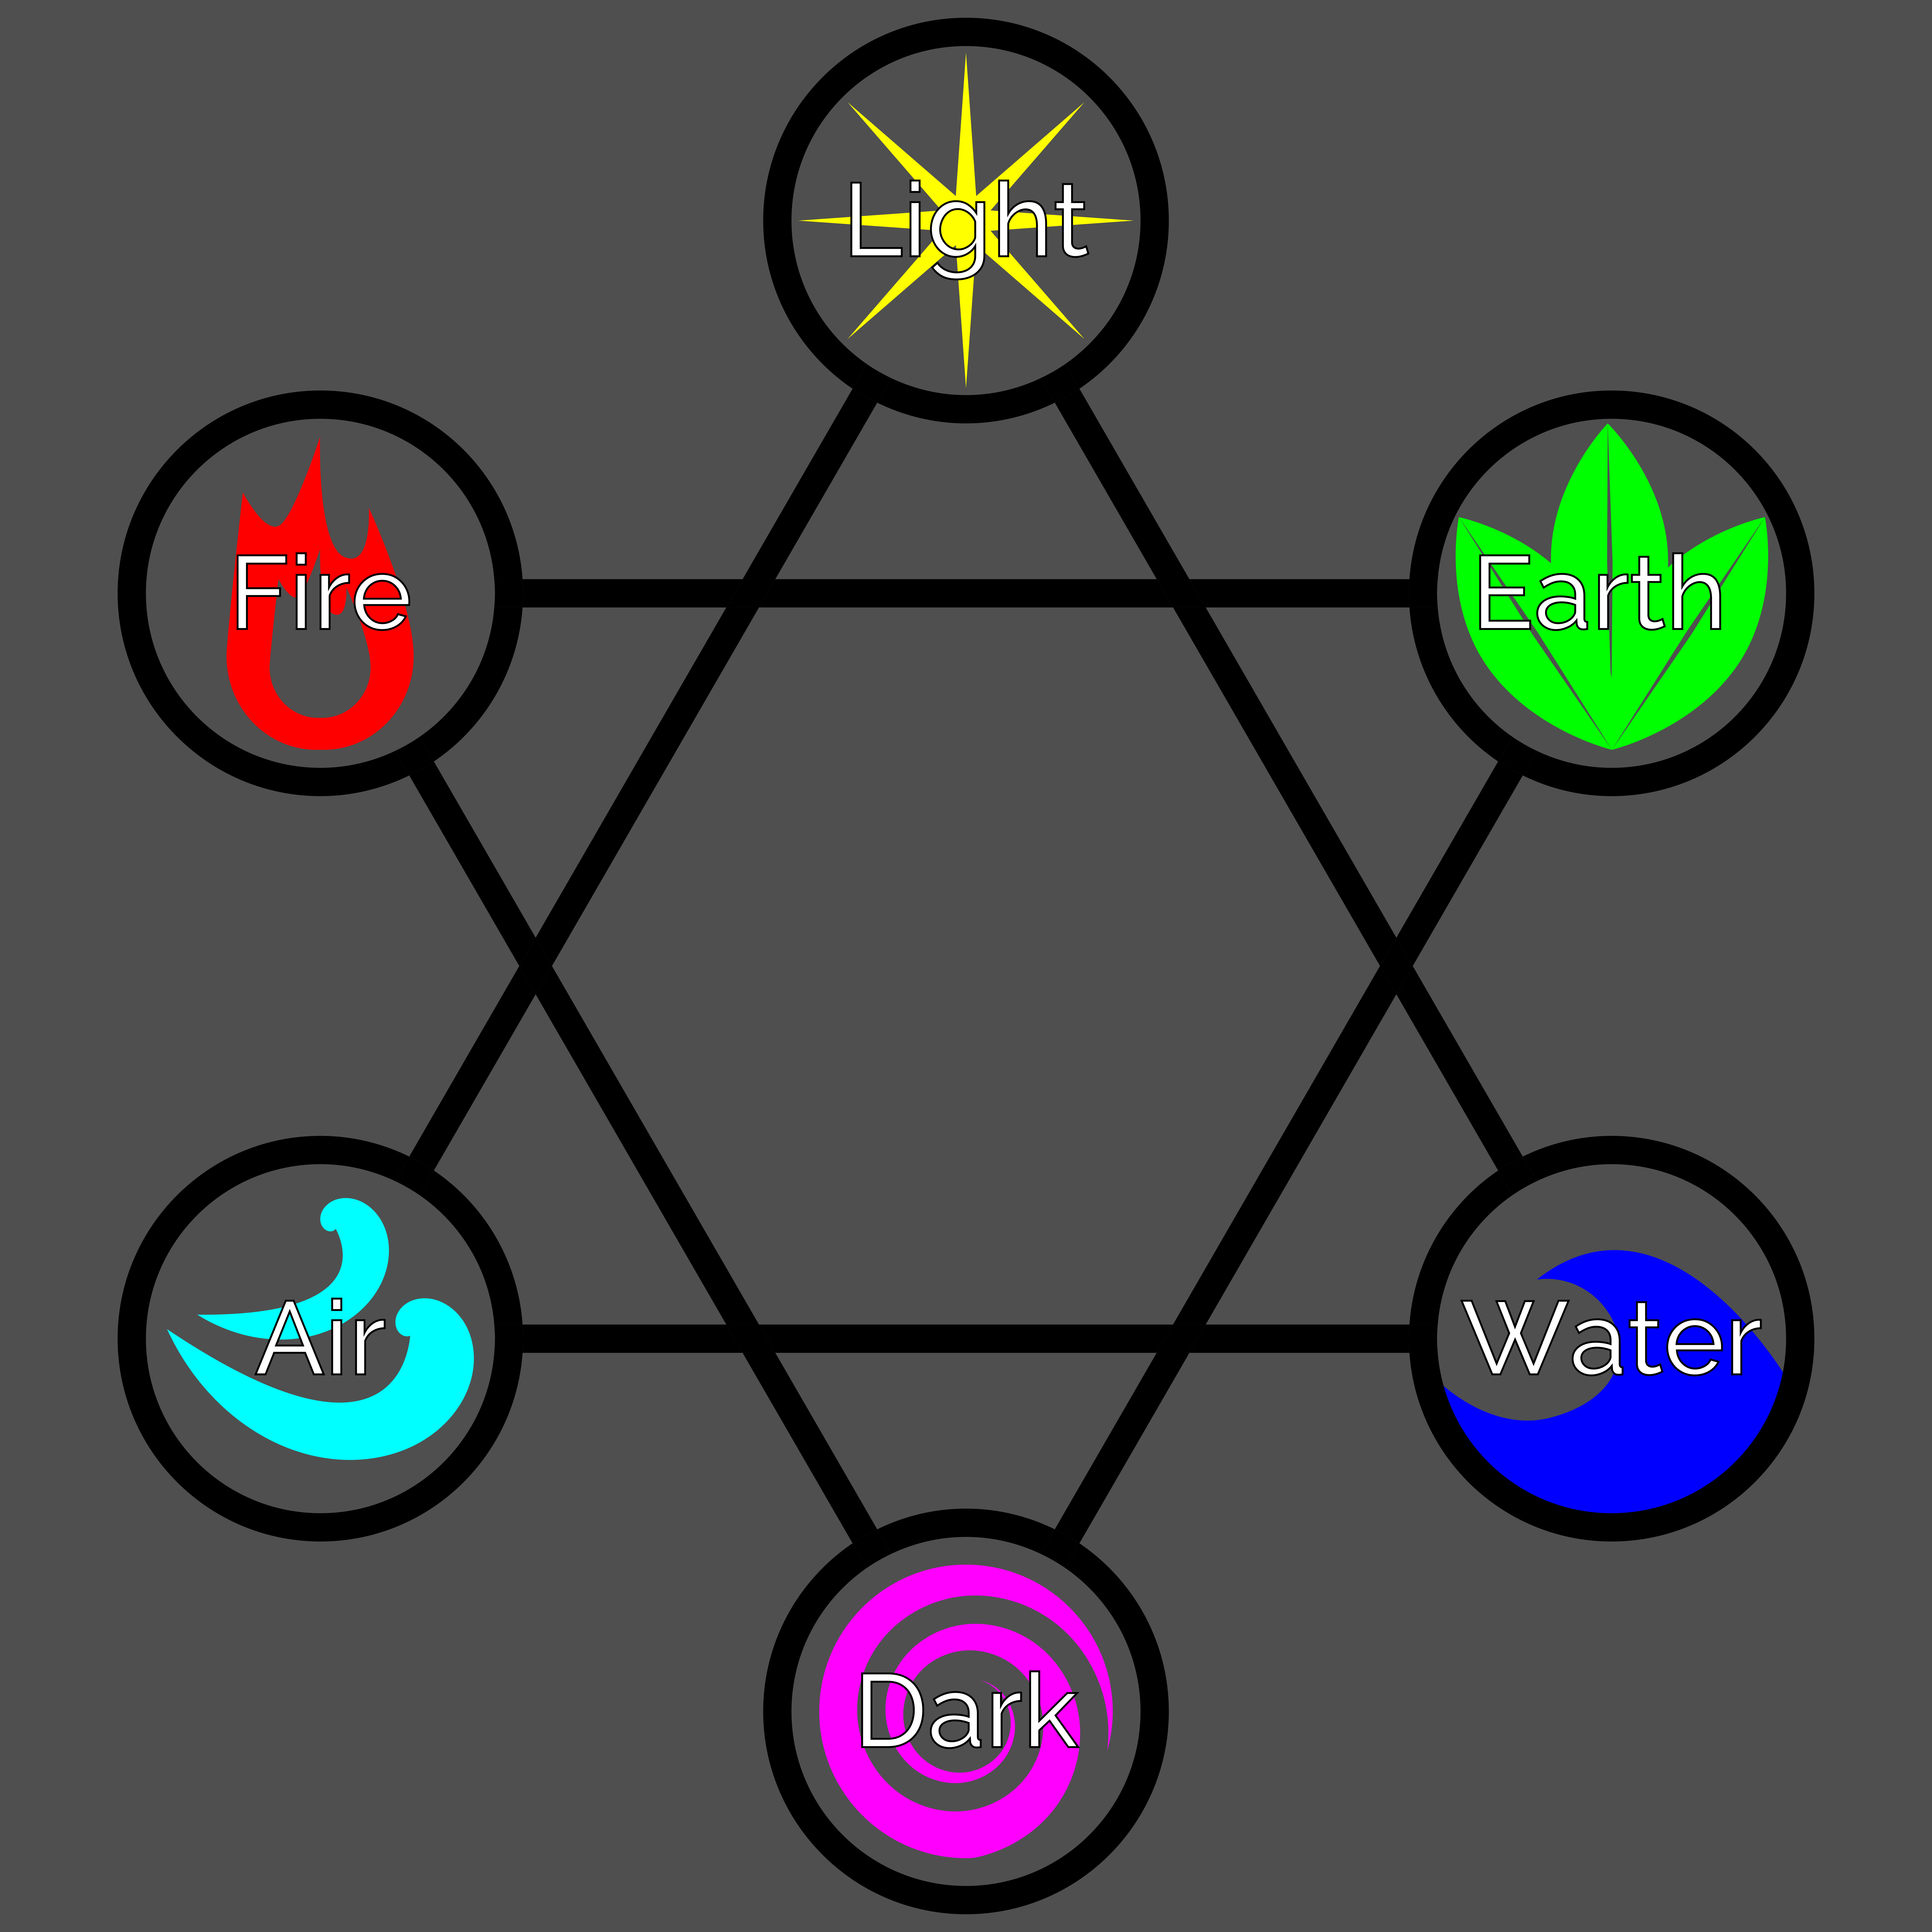 A diagram of the six aspects of magic in Ryva. It has a grey background, black lines, and white text with a small black outline. The diagram consists of a hexagram (more commonly known as a Star of David) with a circle at each point. Going clockwise from the top, the labels and icons inside each circle are as follows: "Light", with a bright yellow, thin eight-pointed star for the icon; "Earth", with a bright lime green three-leafed plant for the icon; "Water", with a bright blue wave for the icon; "Dark", with a bright magenta spiral for the icon; "Air", with two bright cyan gusts of wind stacked atop each other for the icon; and "Fire", with a bright red flame for the icon. The alternate version changes the labels and some of the icons, but keeps all the colors the same. This alternate version is as follows, still clockwise from the top. "Energy", with a lightning bolt icon; "Nature"; "Ice", with a snowflake icon; "Void"; "Wind"; and "Lava", with a slightly wavy pool of lava for the icon.